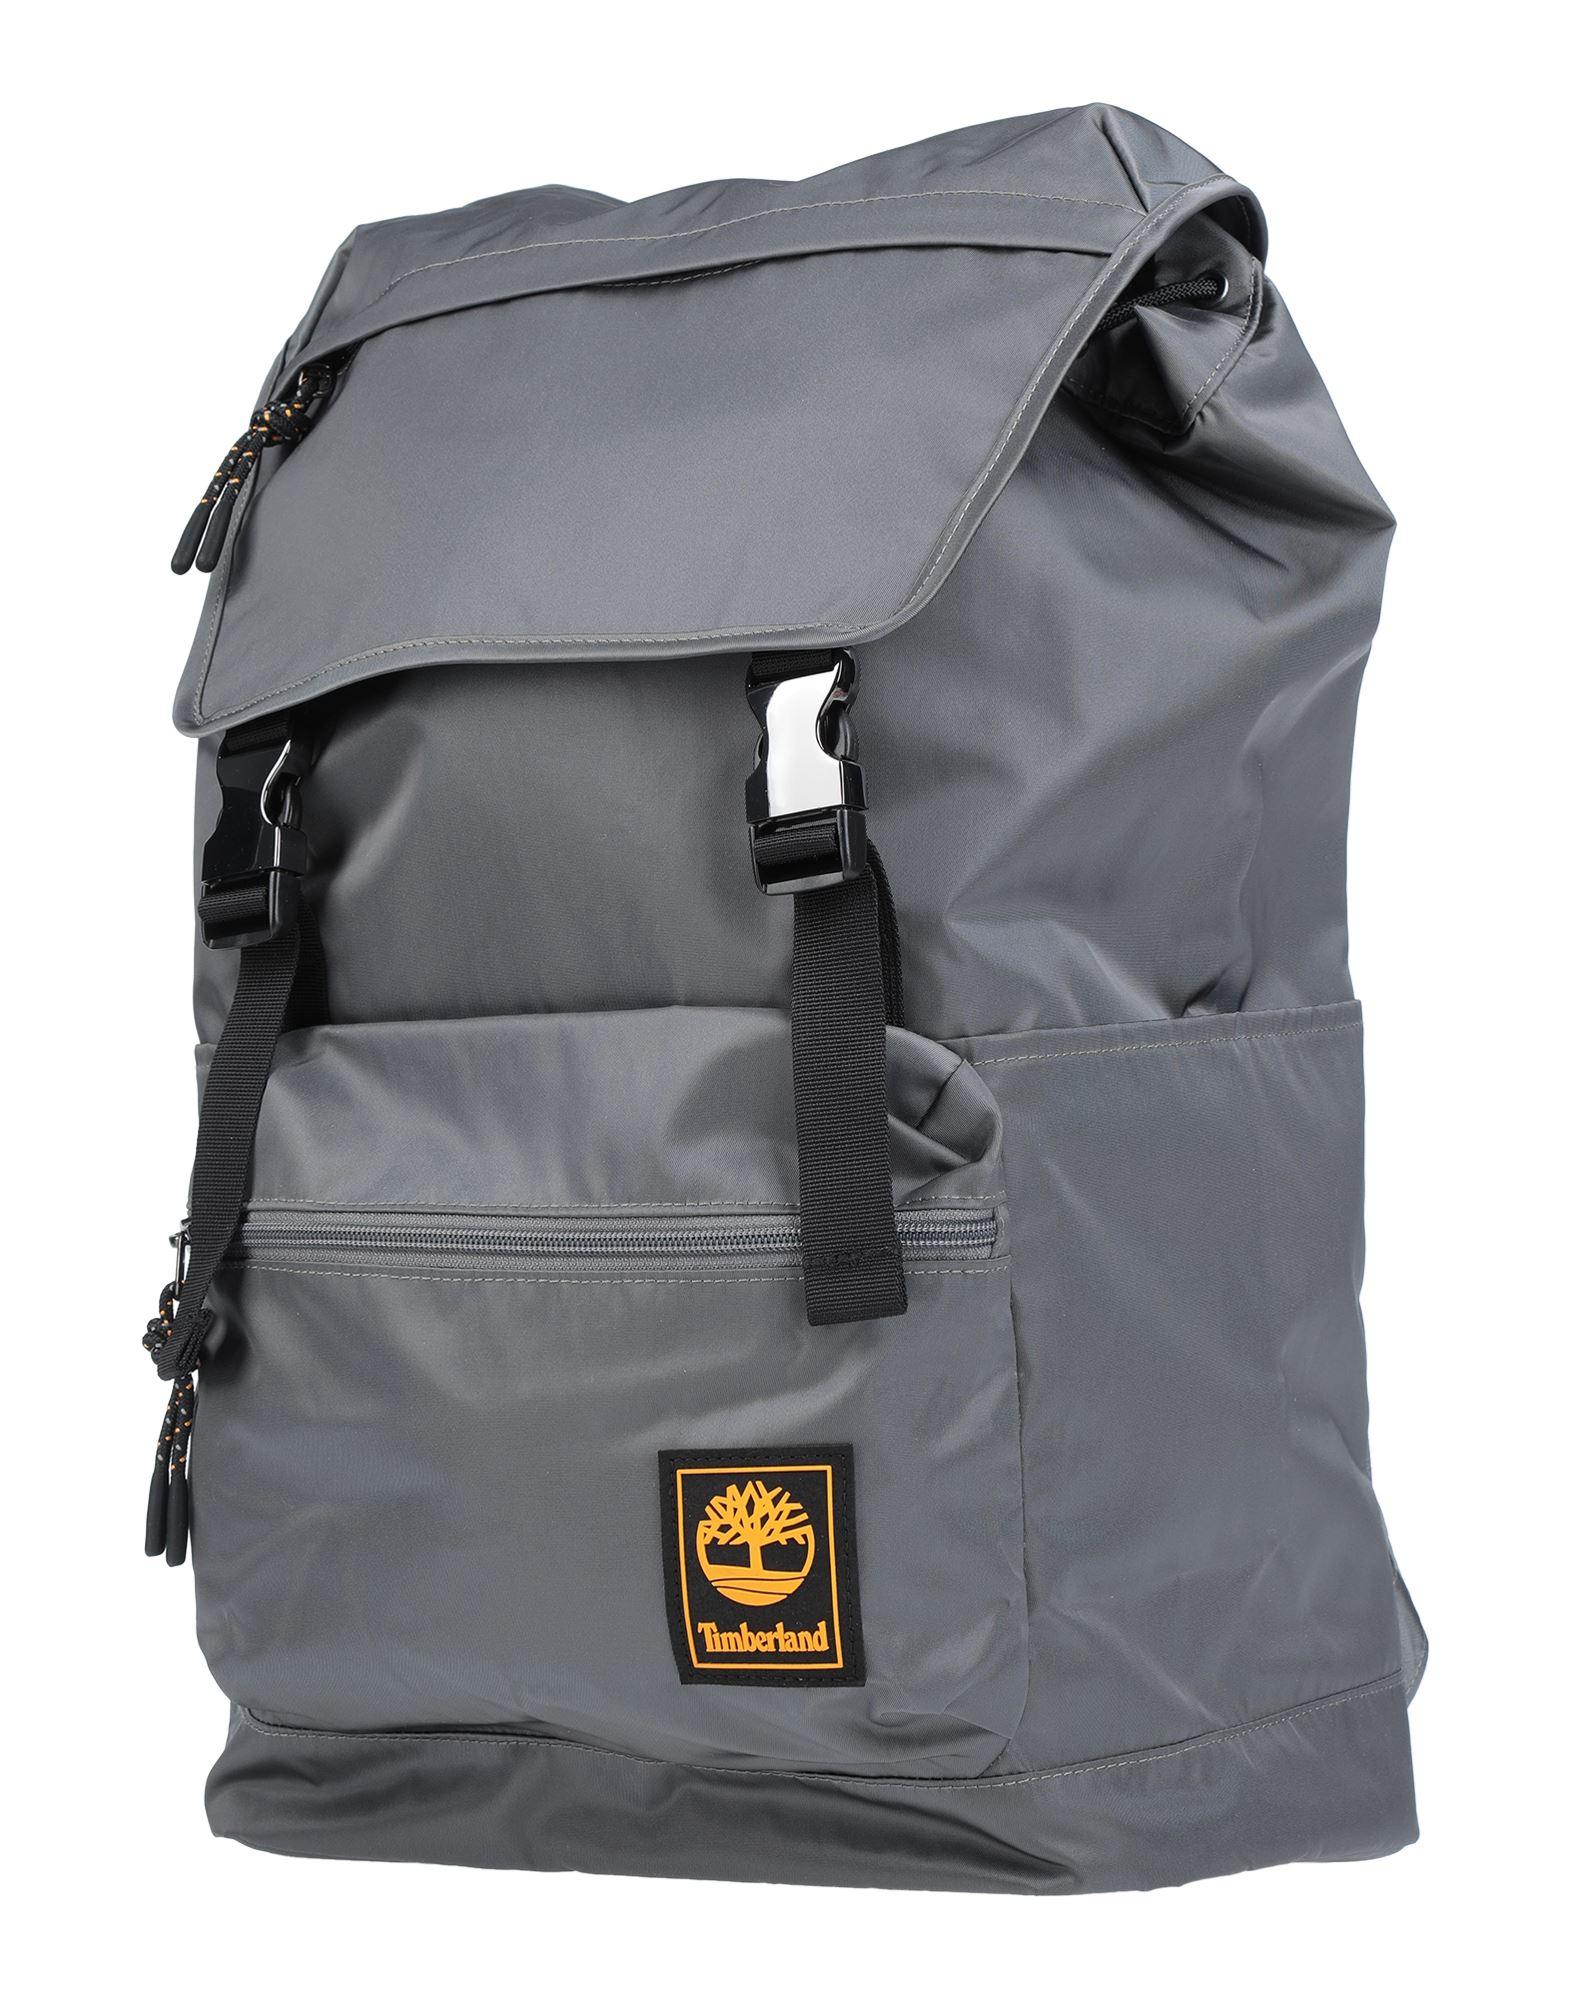 Timberland Backpacks & Bum Bags in Grey (Gray) for Men - Lyst